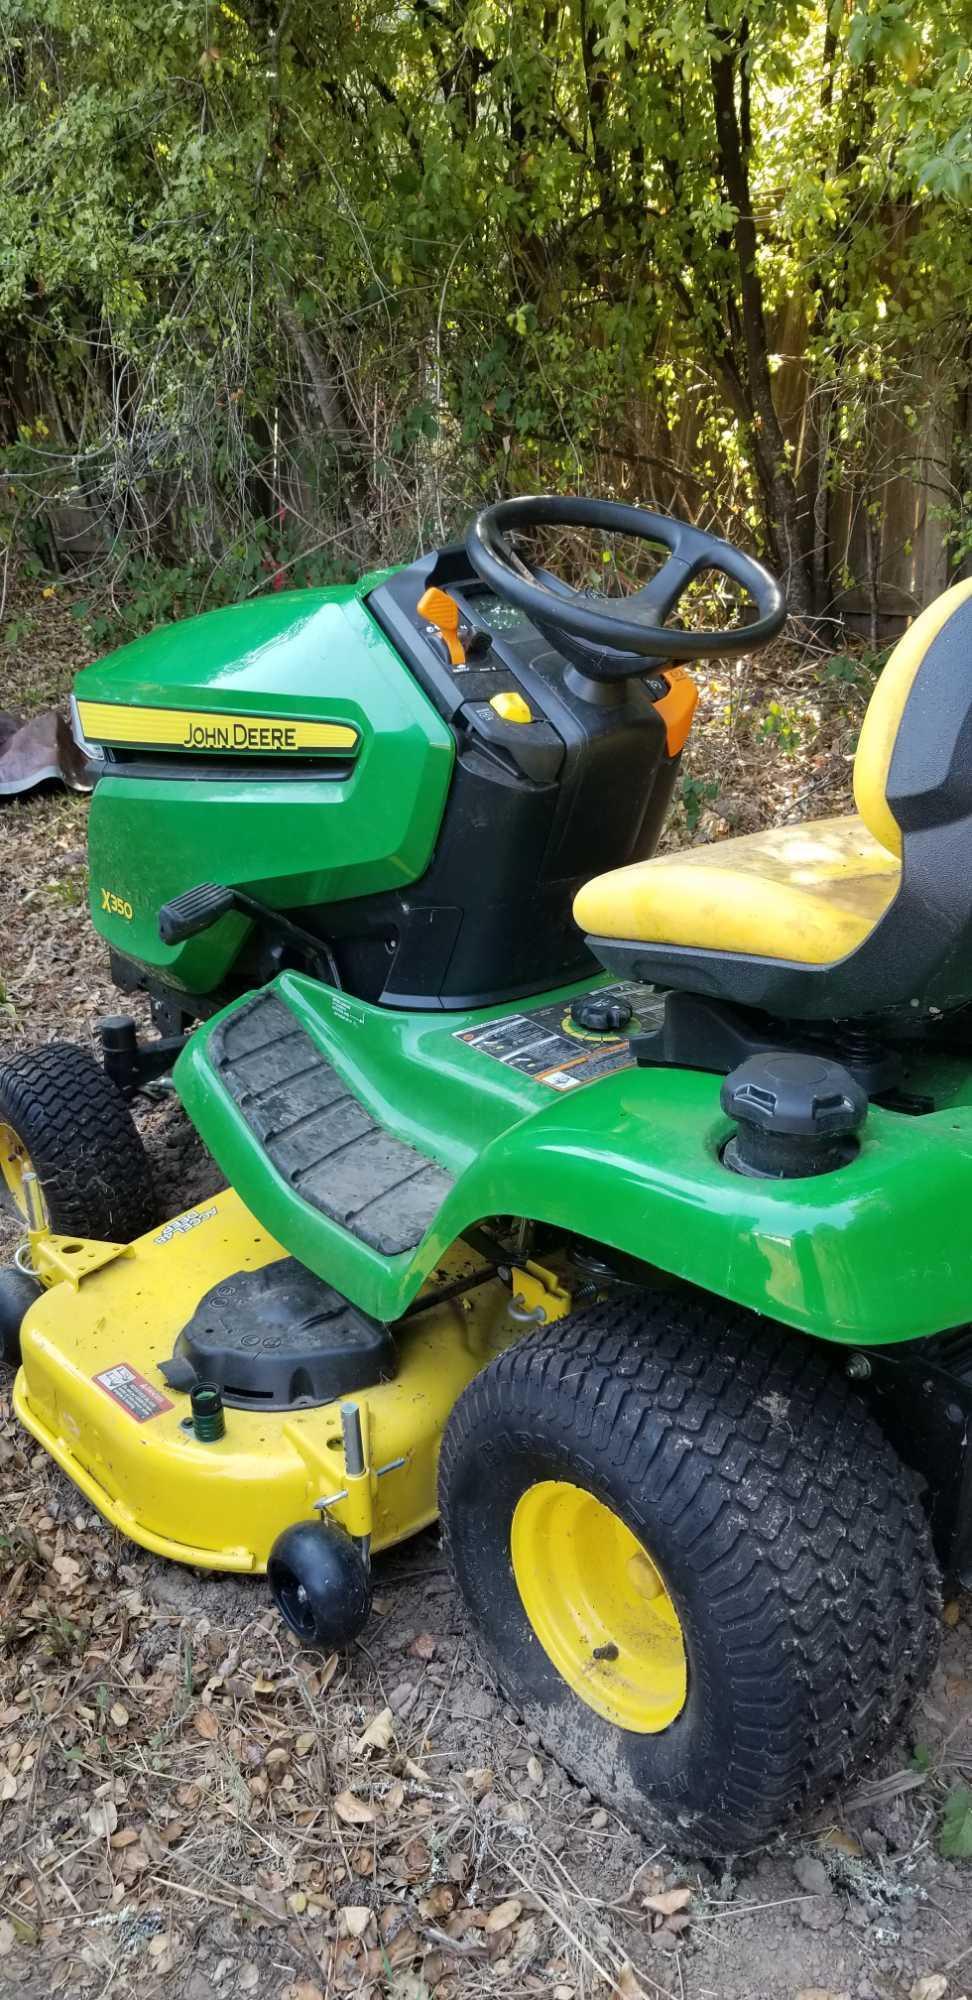 John Deere X350 Lawn Tractor with 48 in Deck